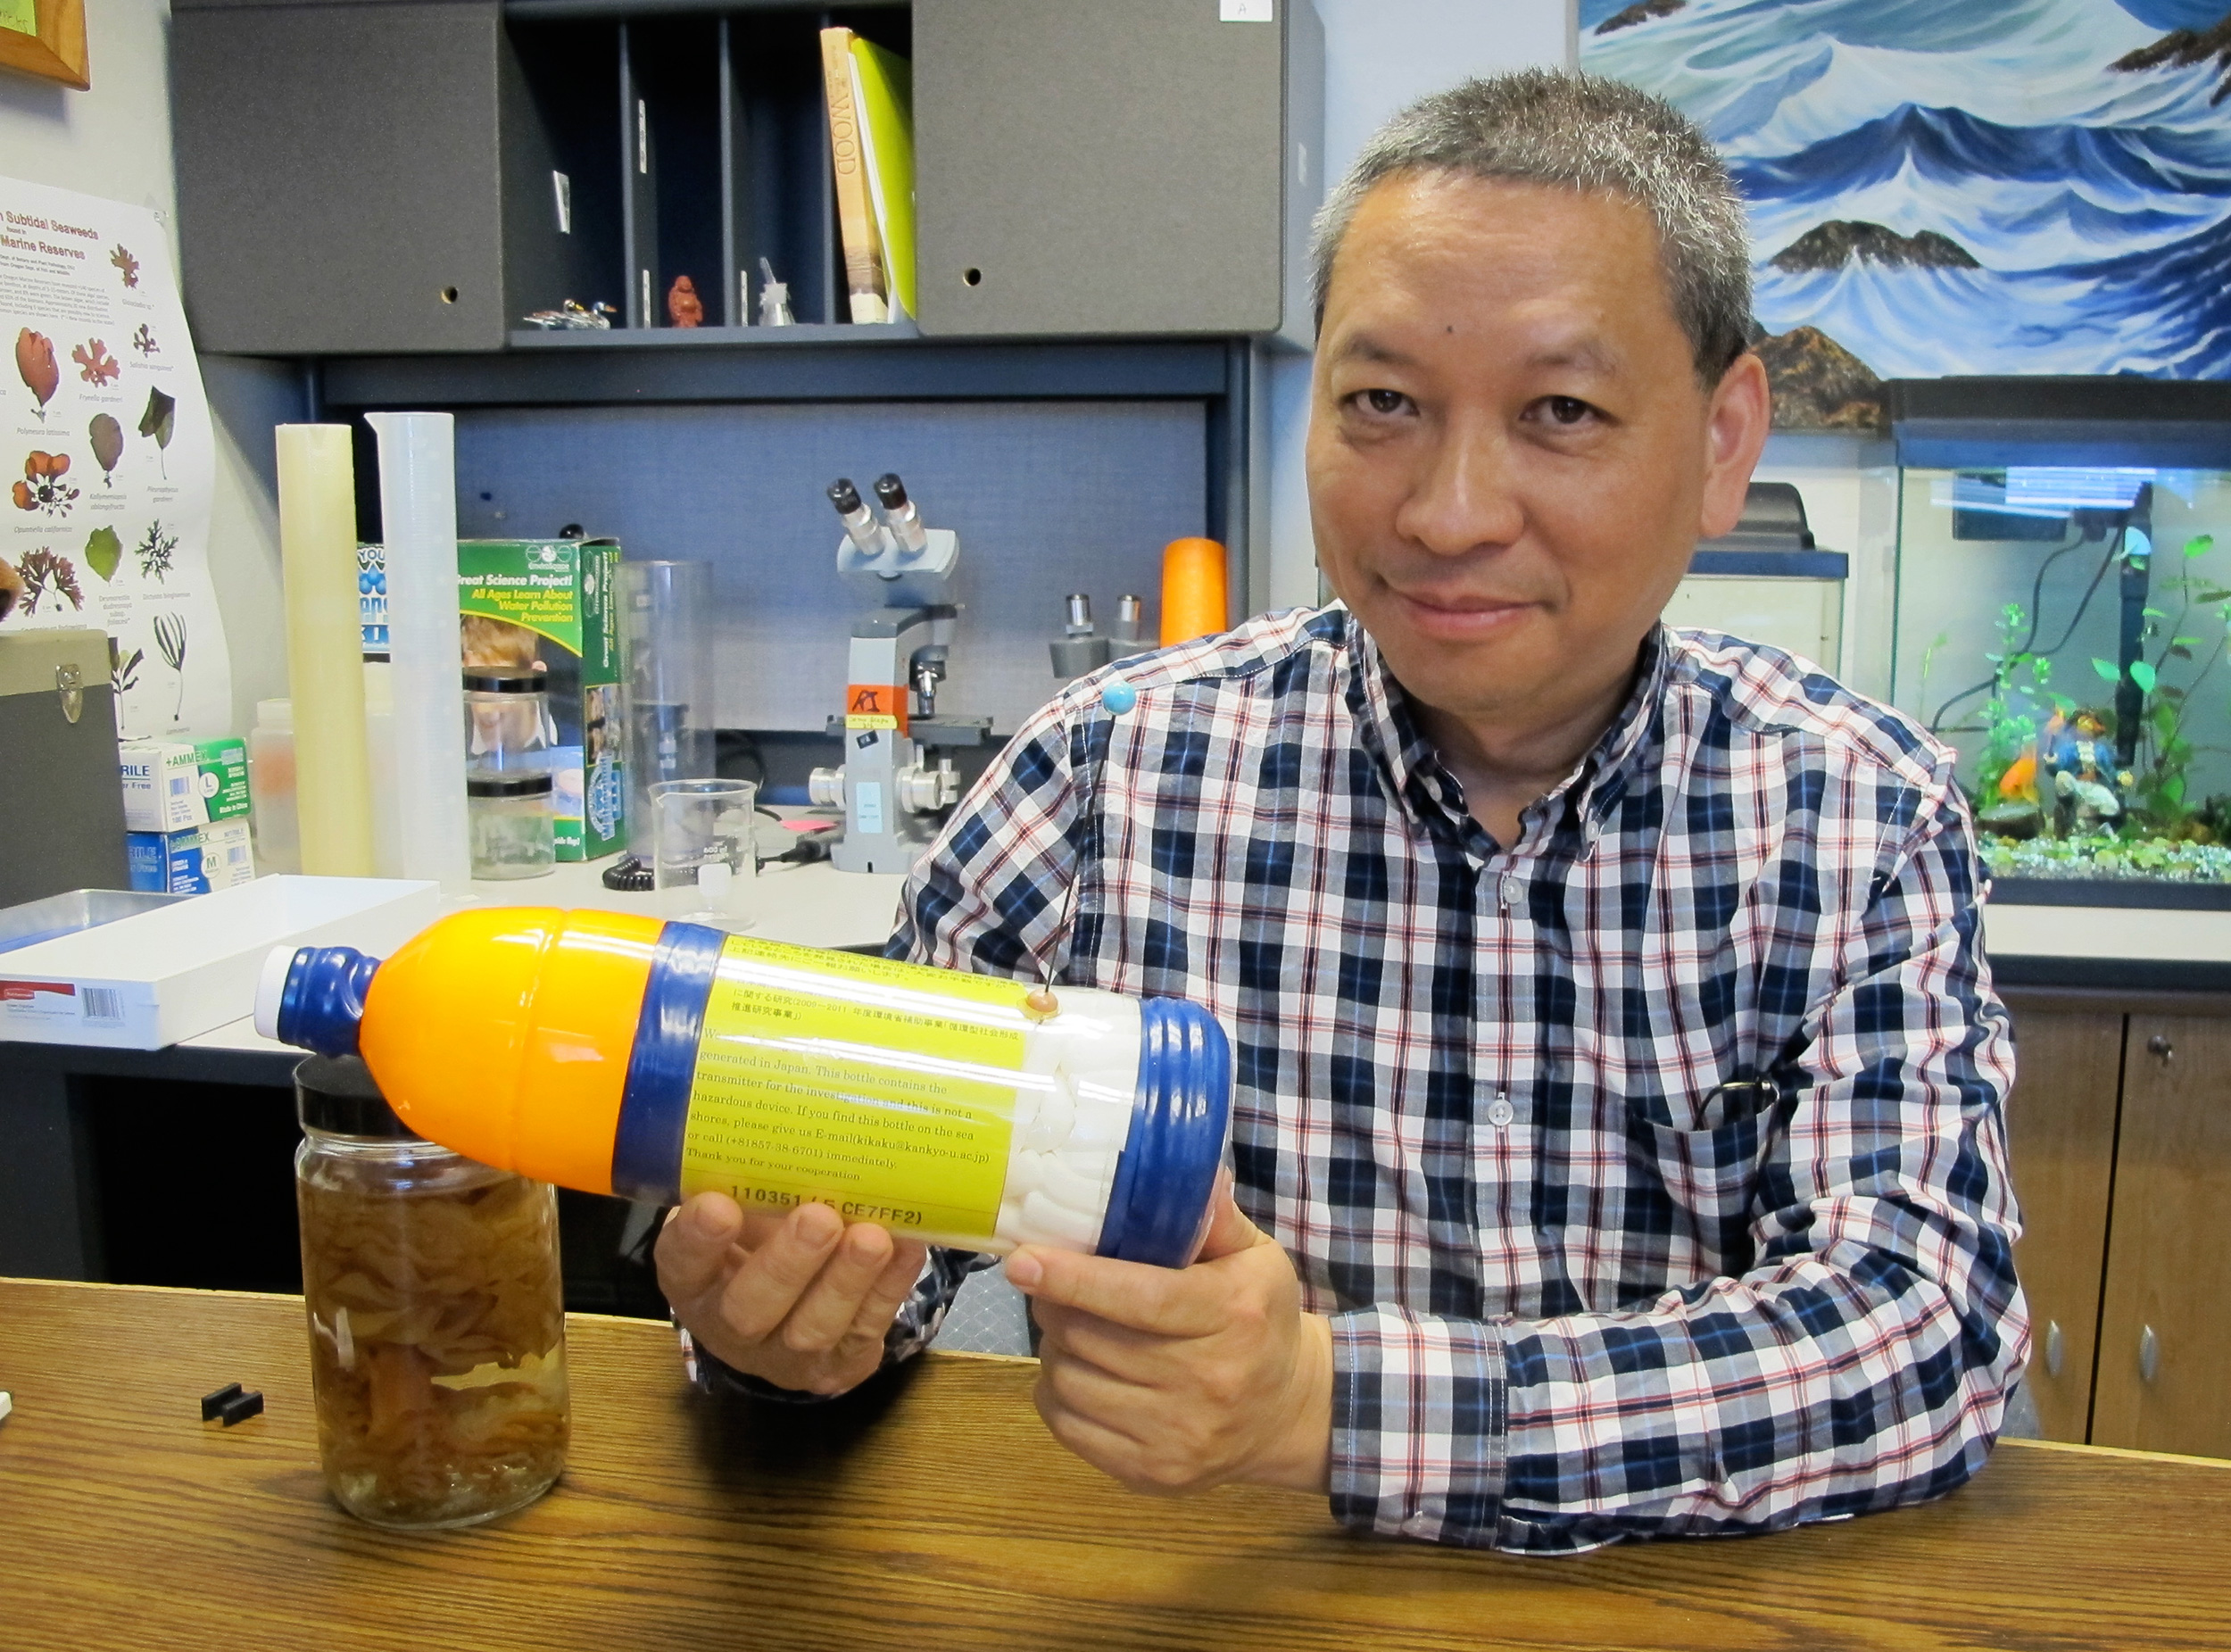 A tsunami and no water to drink: how disaster inspired lifesaving invention, Access to water